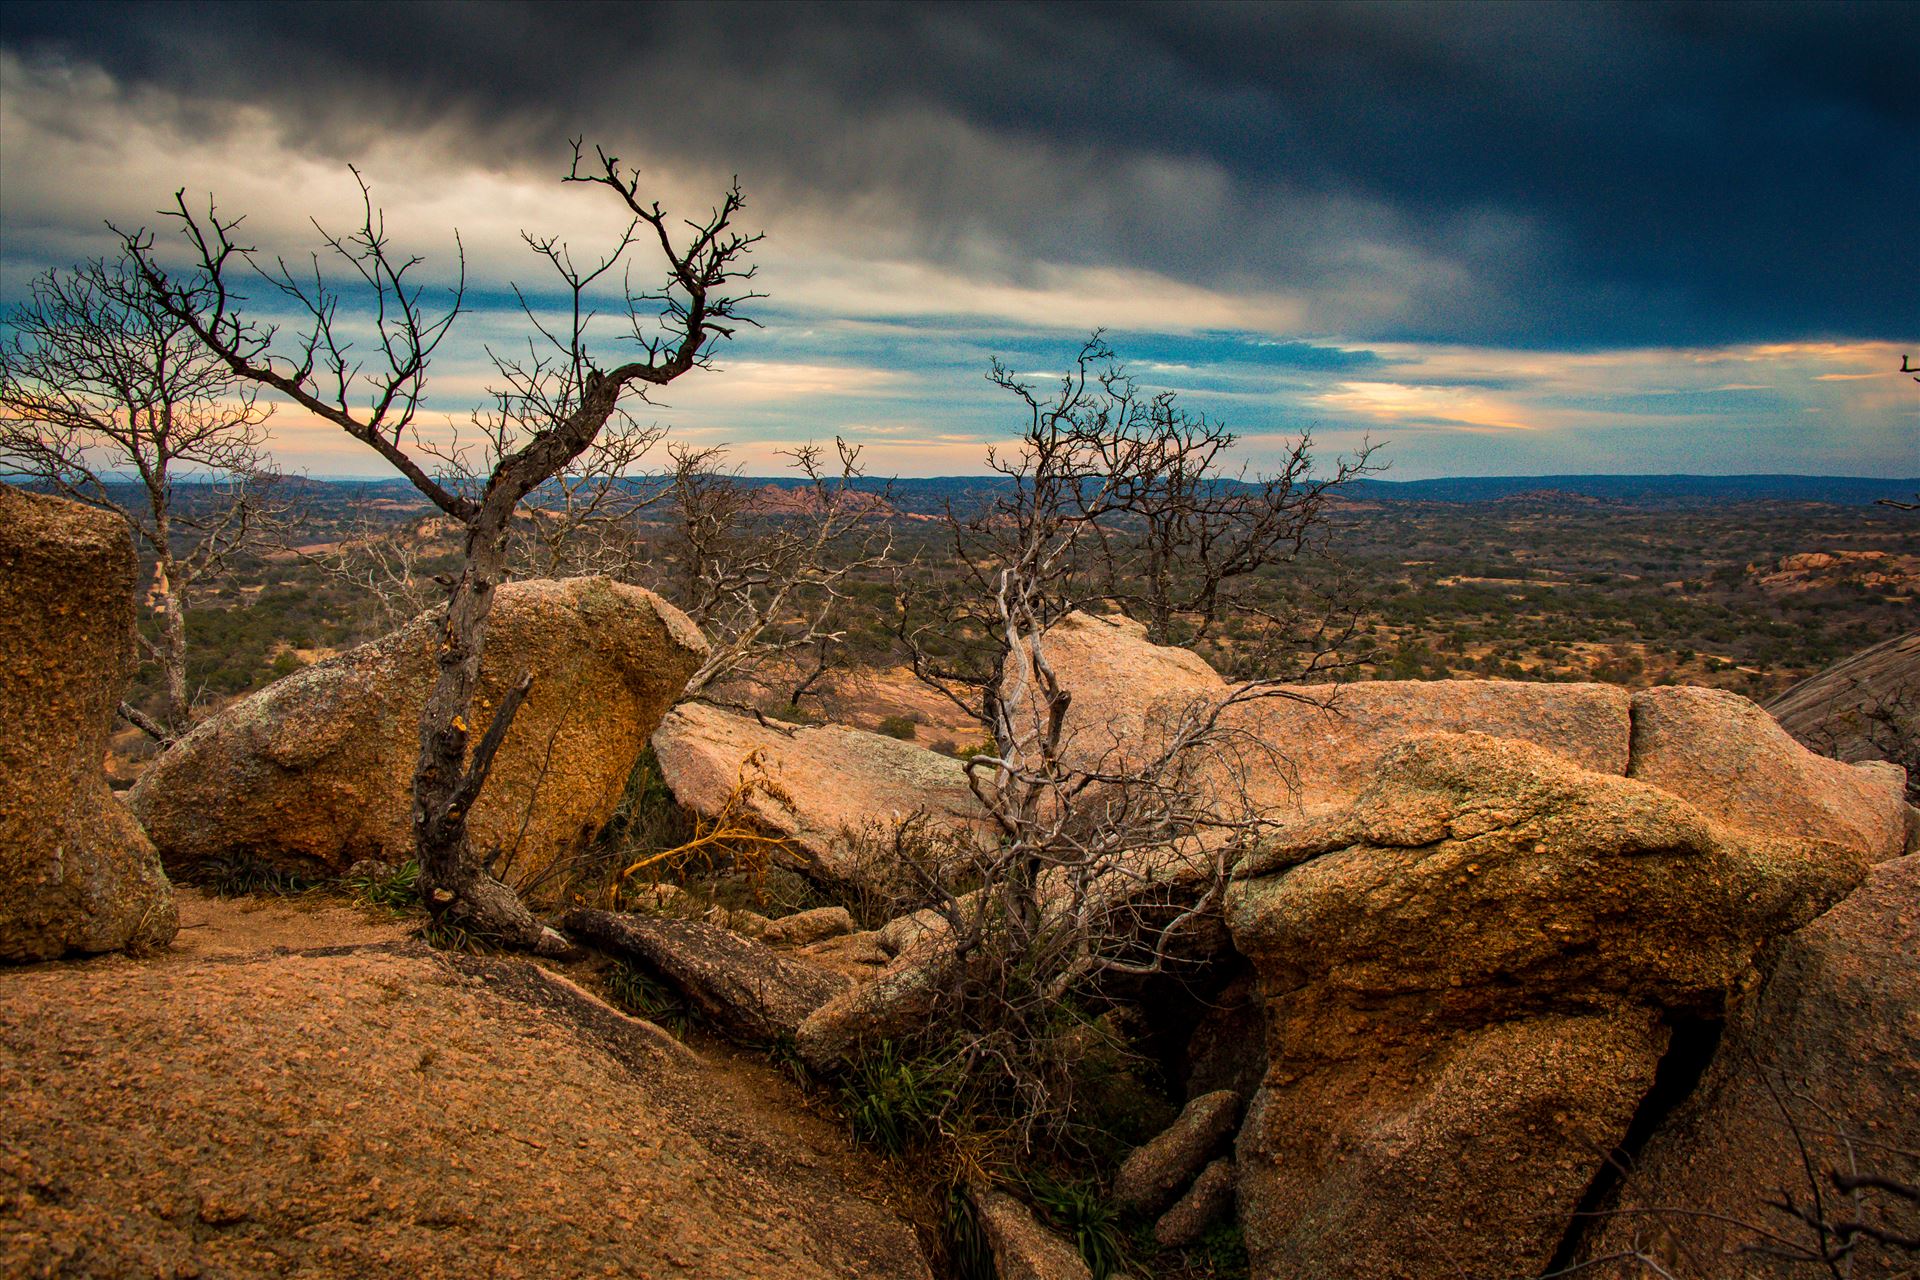 20140112-Enchanted Rock-DSLR-040.jpg  by Charles Smith Photography